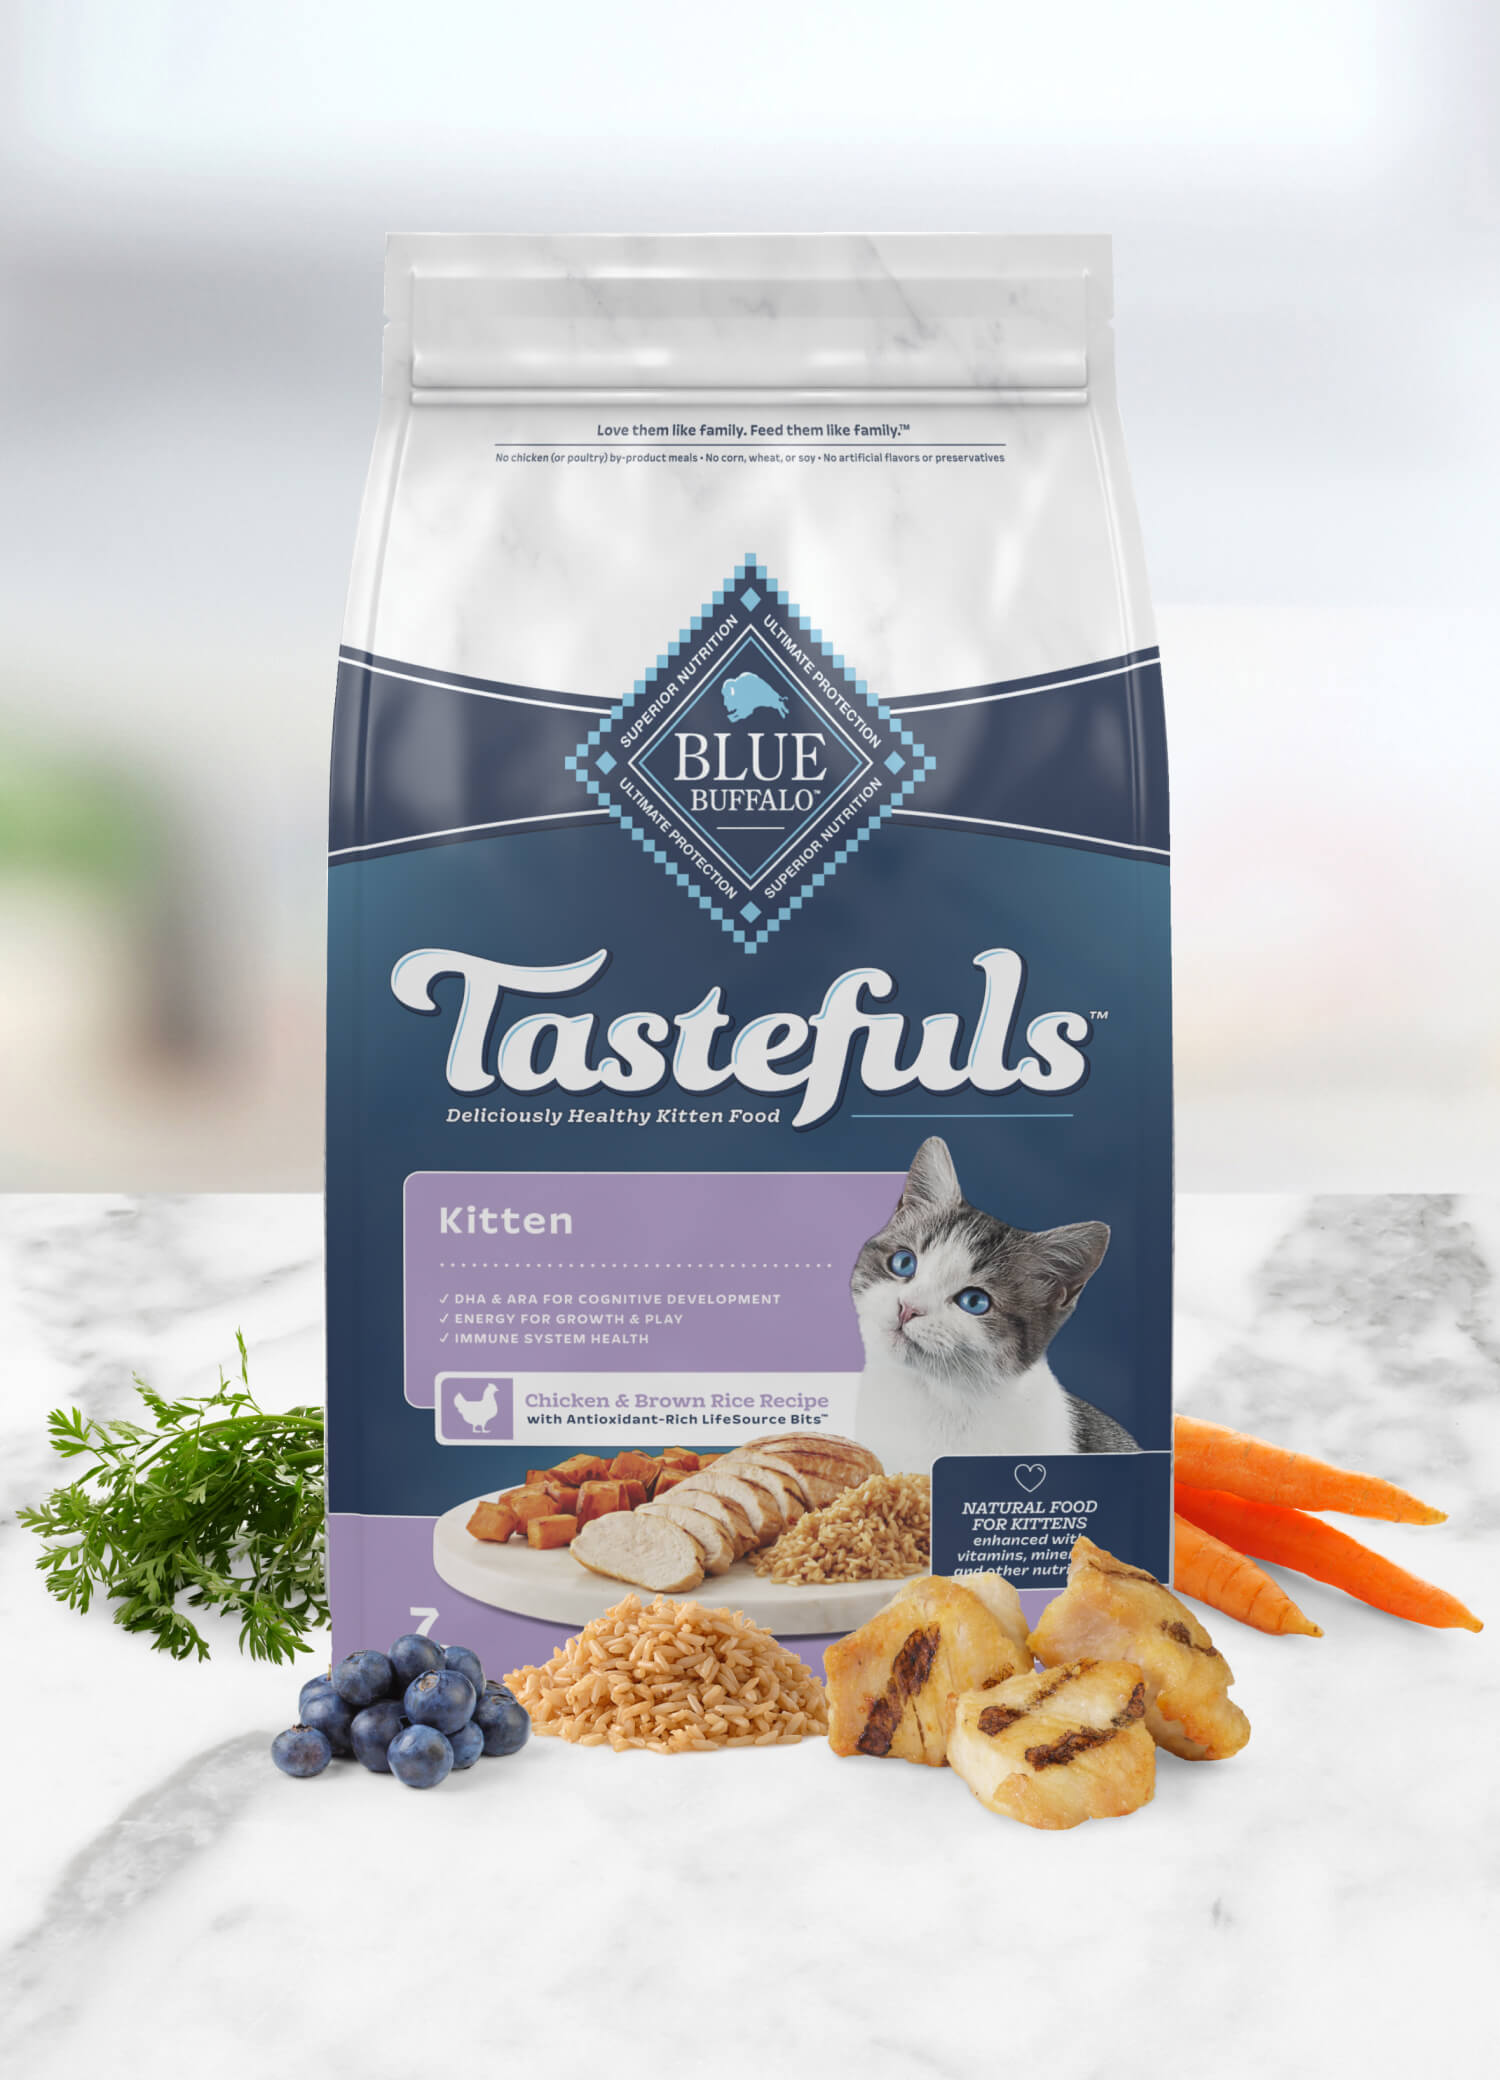 A bag of Blue Buffalo Tastefuls kitten food with chicken & brown rice, surrounded by ingredients like carrots and blueberries.